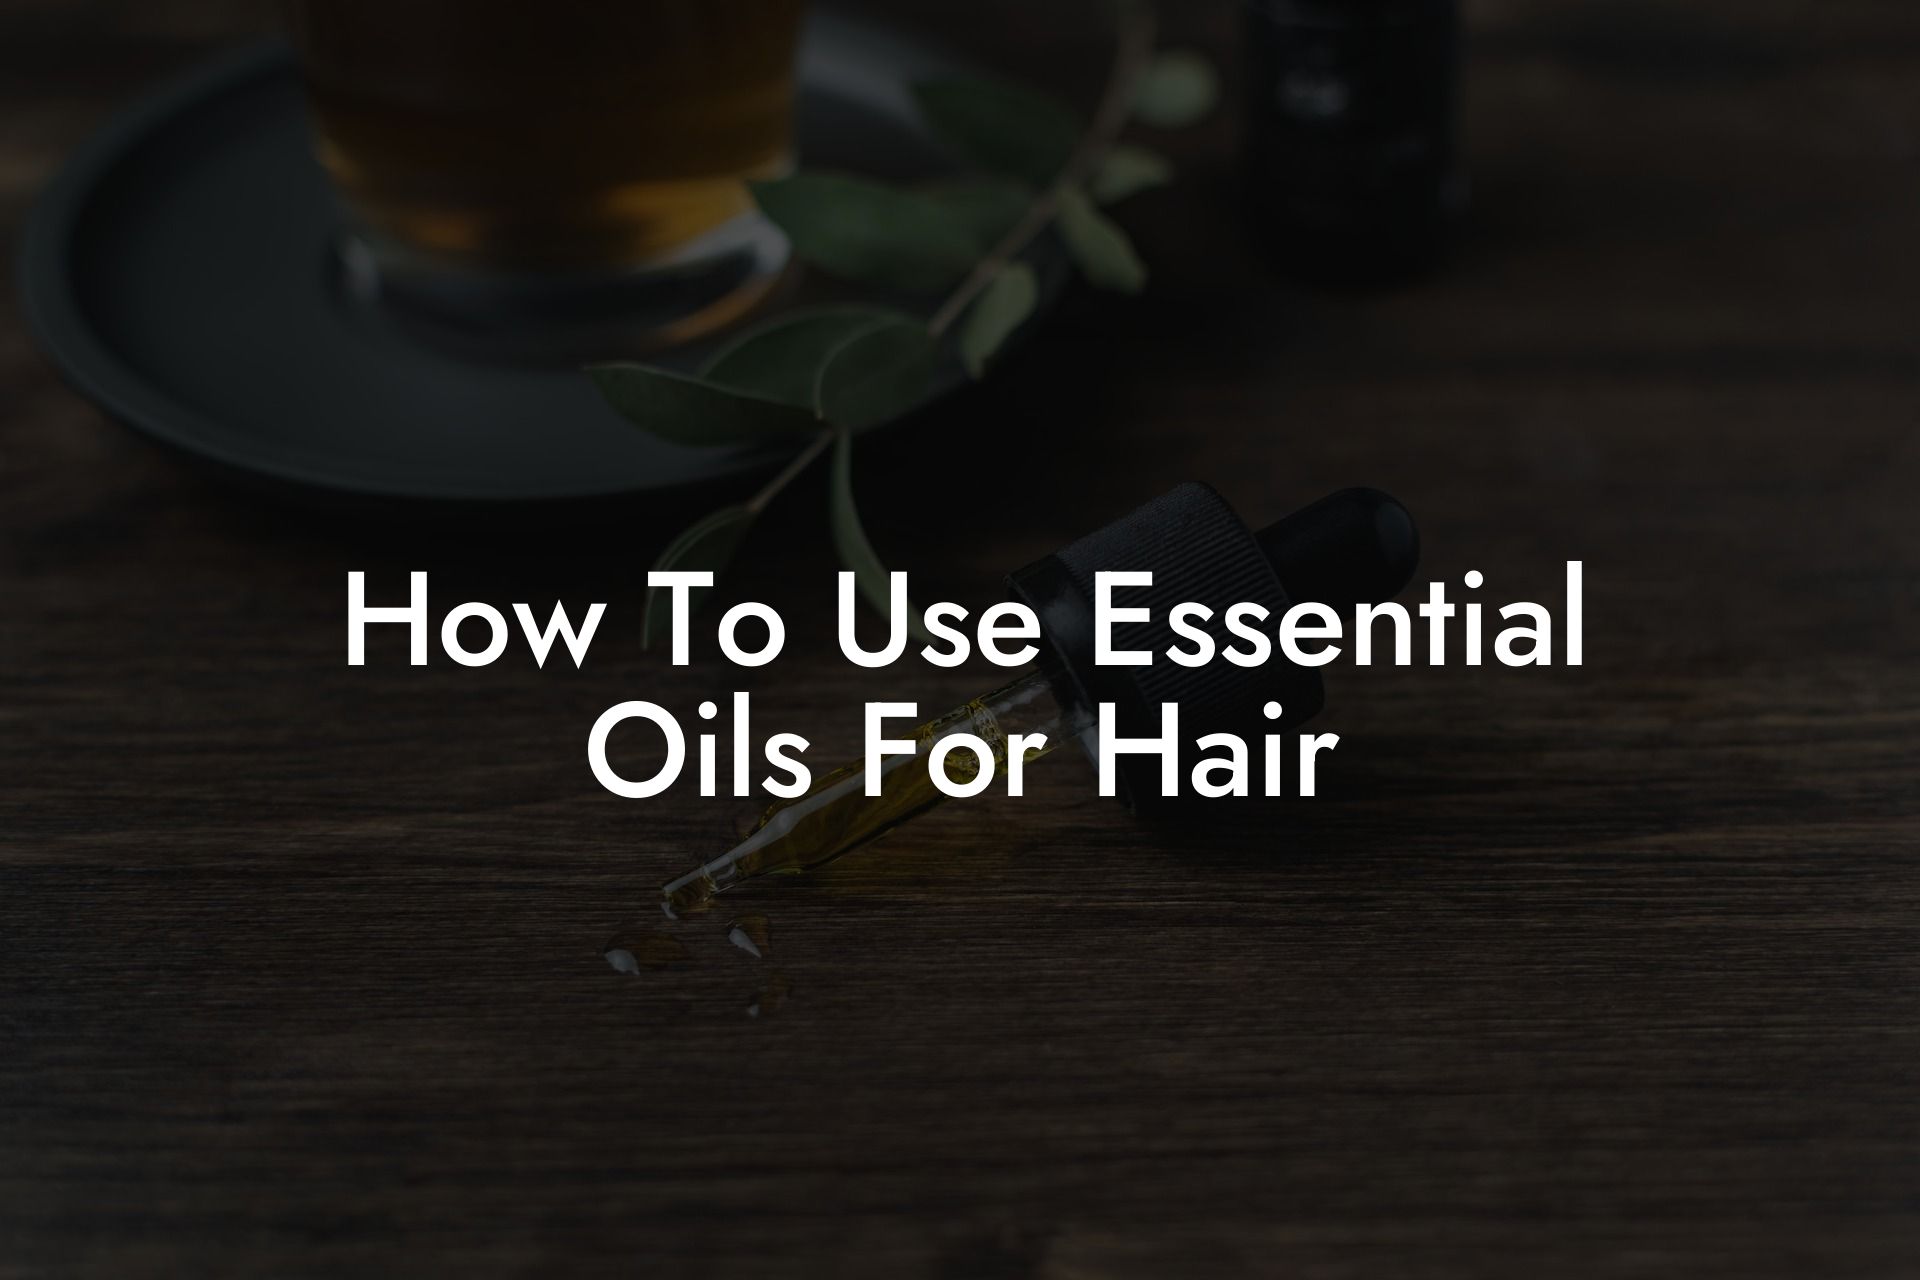 How To Use Essential Oils For Hair